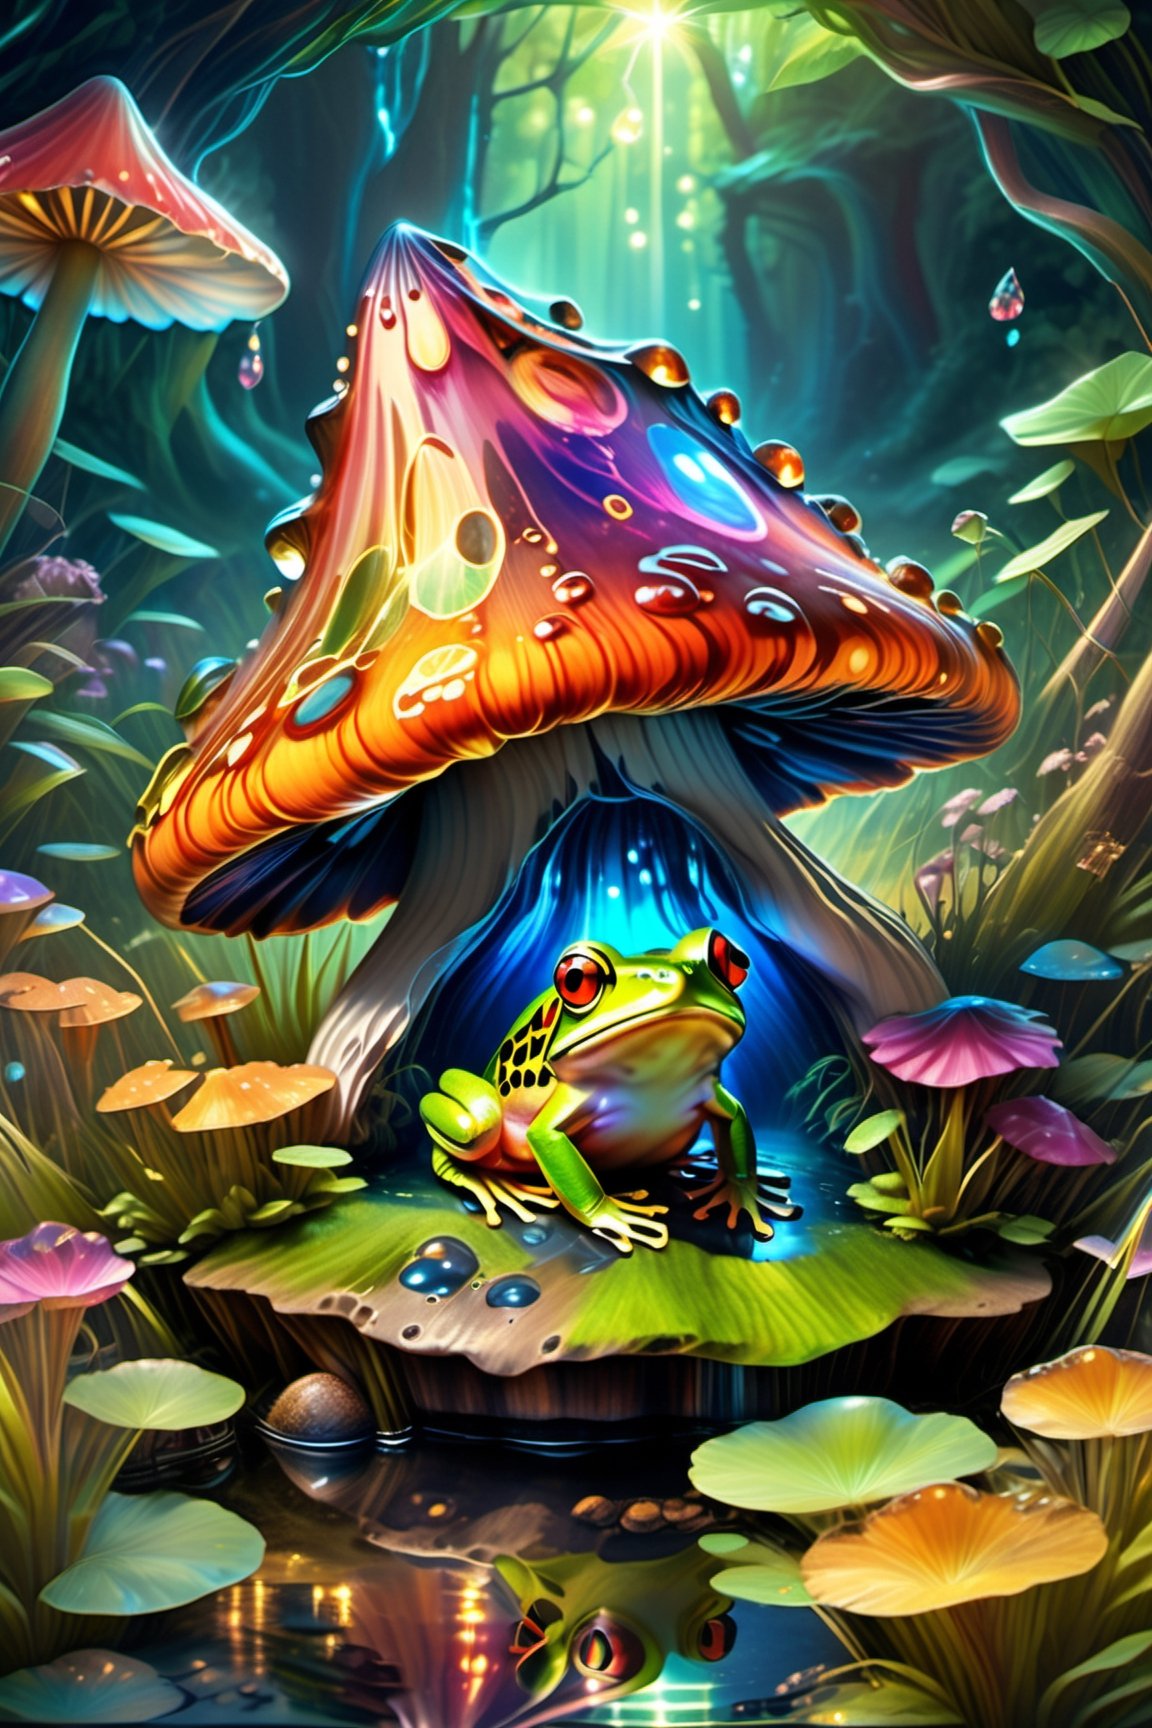 Illustrate an image of a cute frog taking shelter beneath a large colourful mushroom,  set on a small piece of grass beside a small pond,  white background,  high gloss,  DonMBl00mingF41ryXL , DonMDj1nnM4g1cXL, ,ColorART